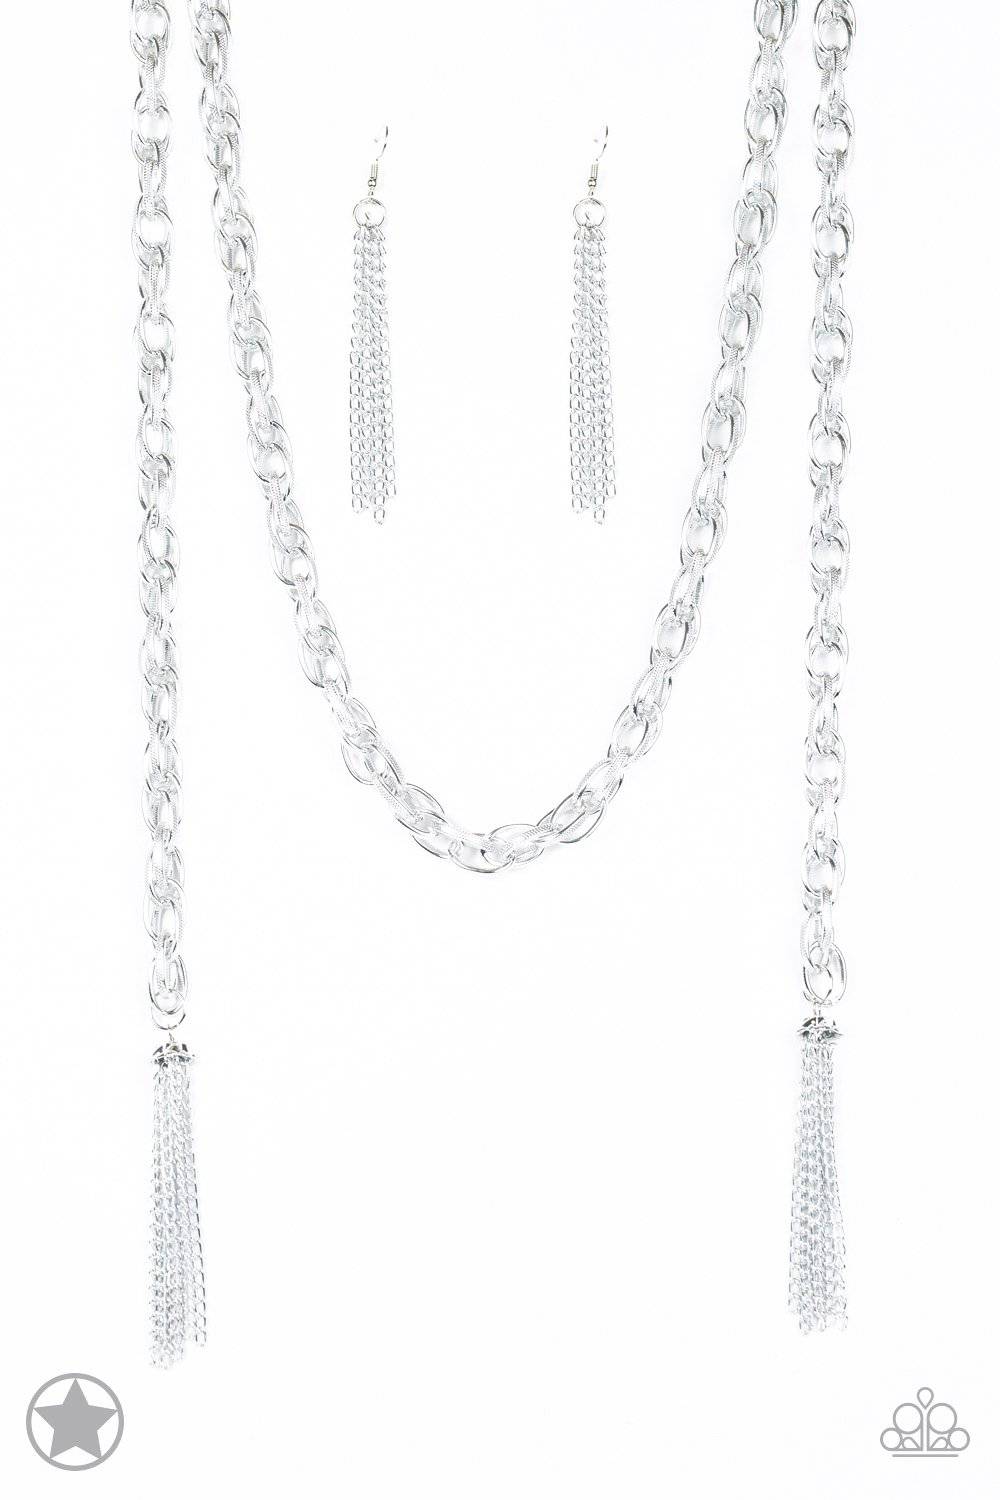 SCARFed for Attention - Silver Blockbuster Chain Tassel Necklace - Paparazzi Accessories - GlaMarous Titi Jewels